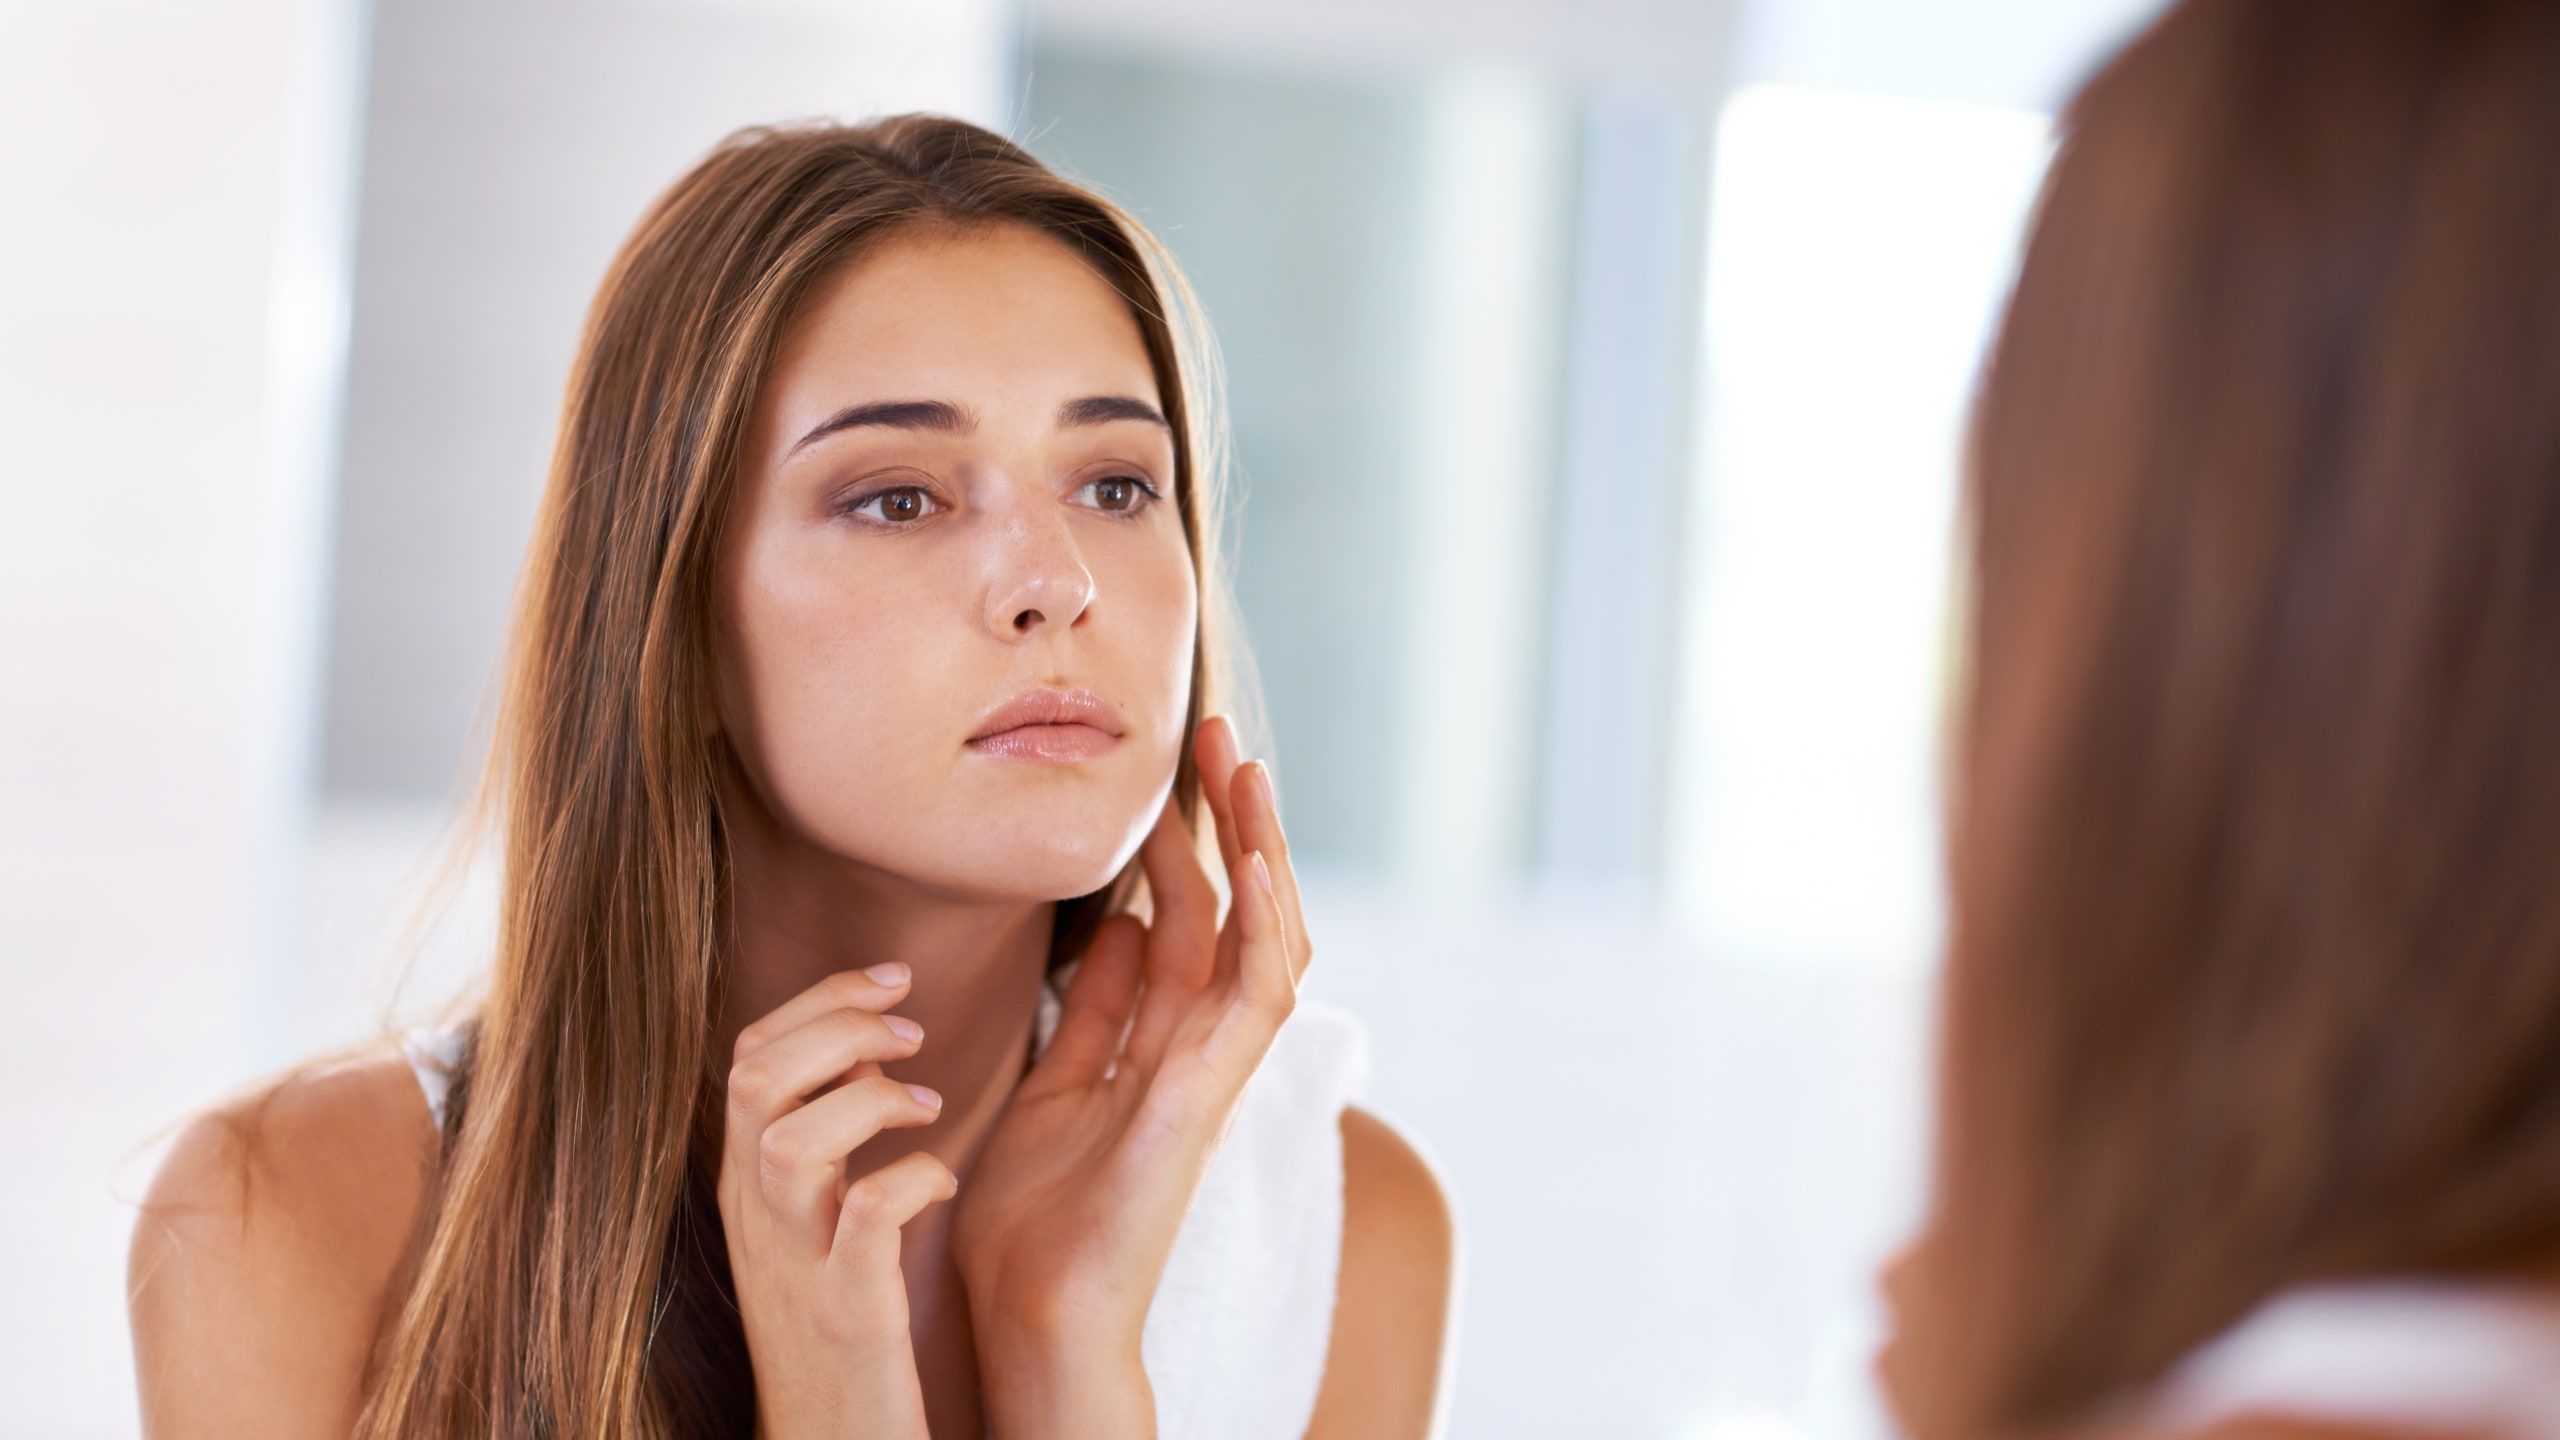 Chin Breakouts Could Be Caused By Hormonal Acne